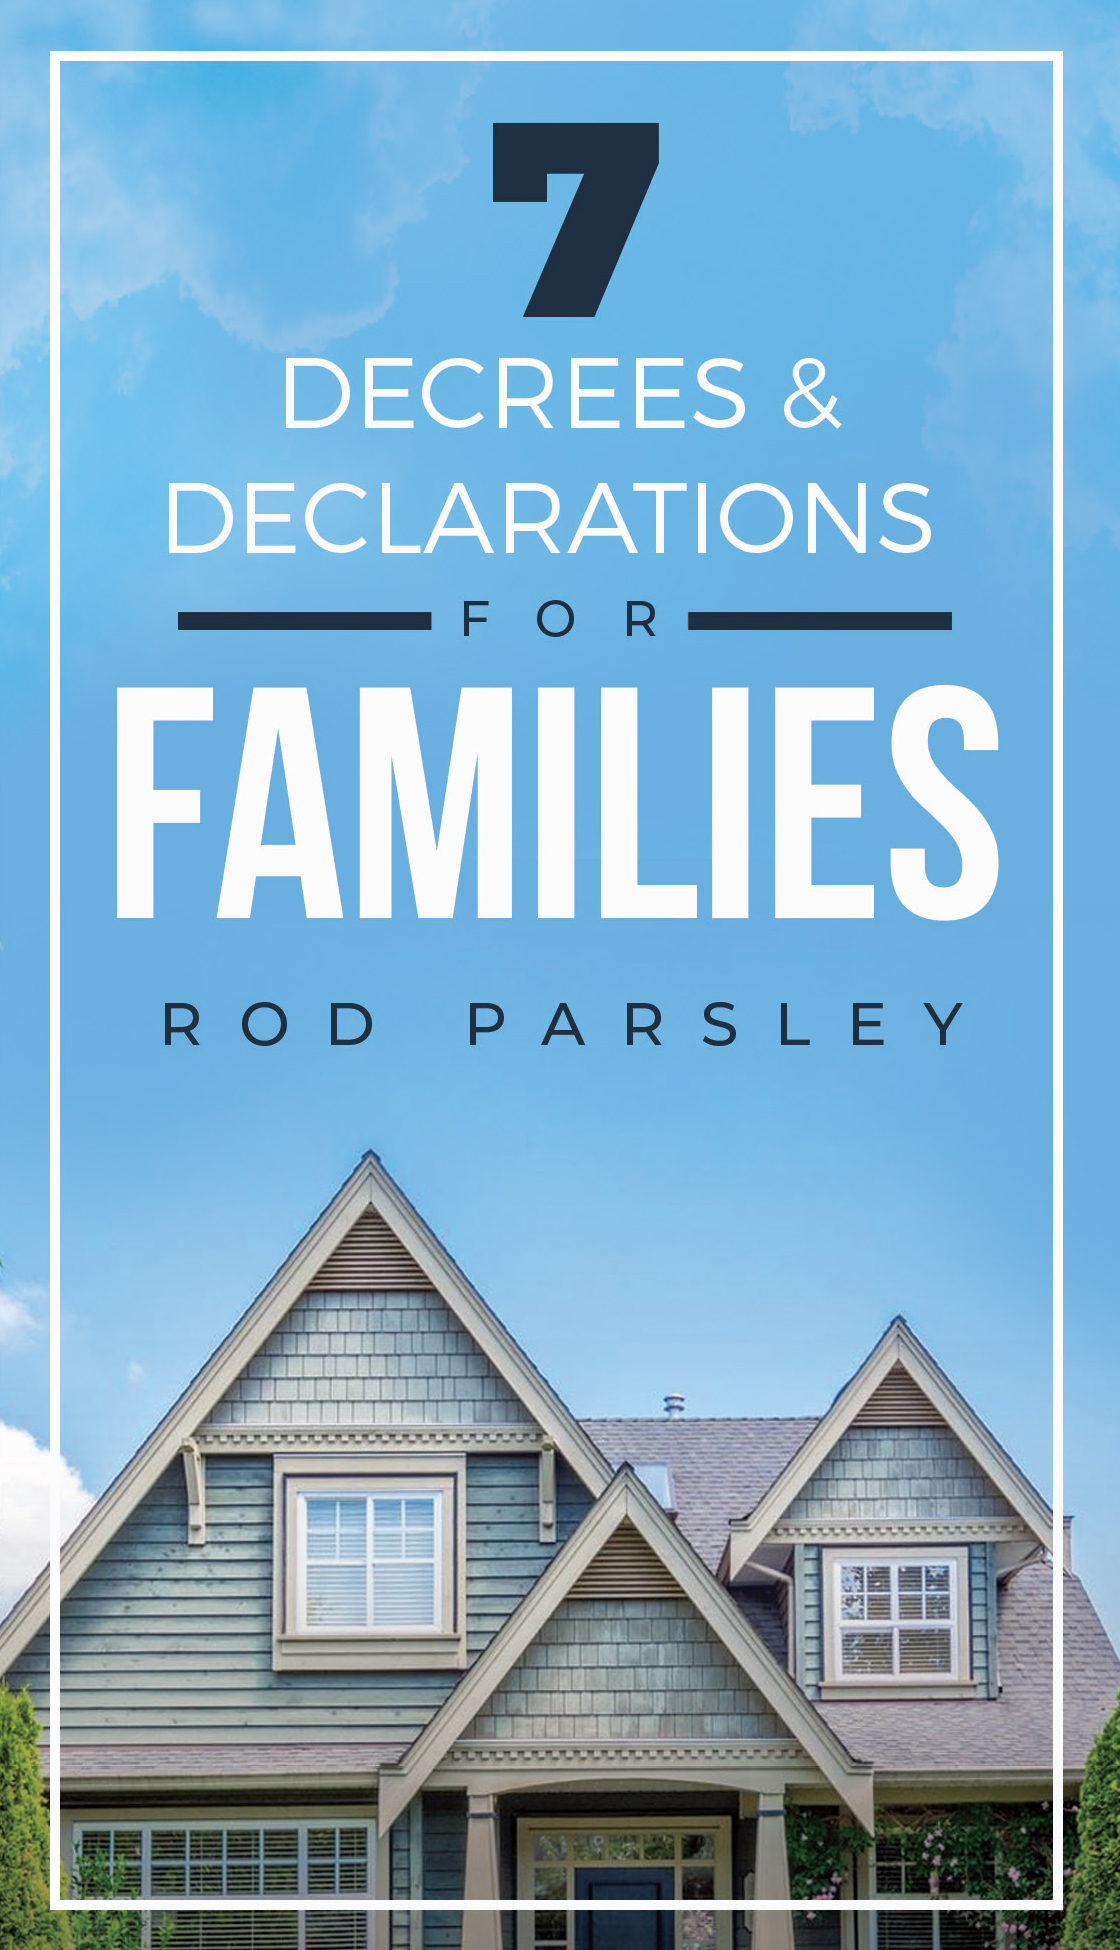 7 Decrees and Declarations for Families